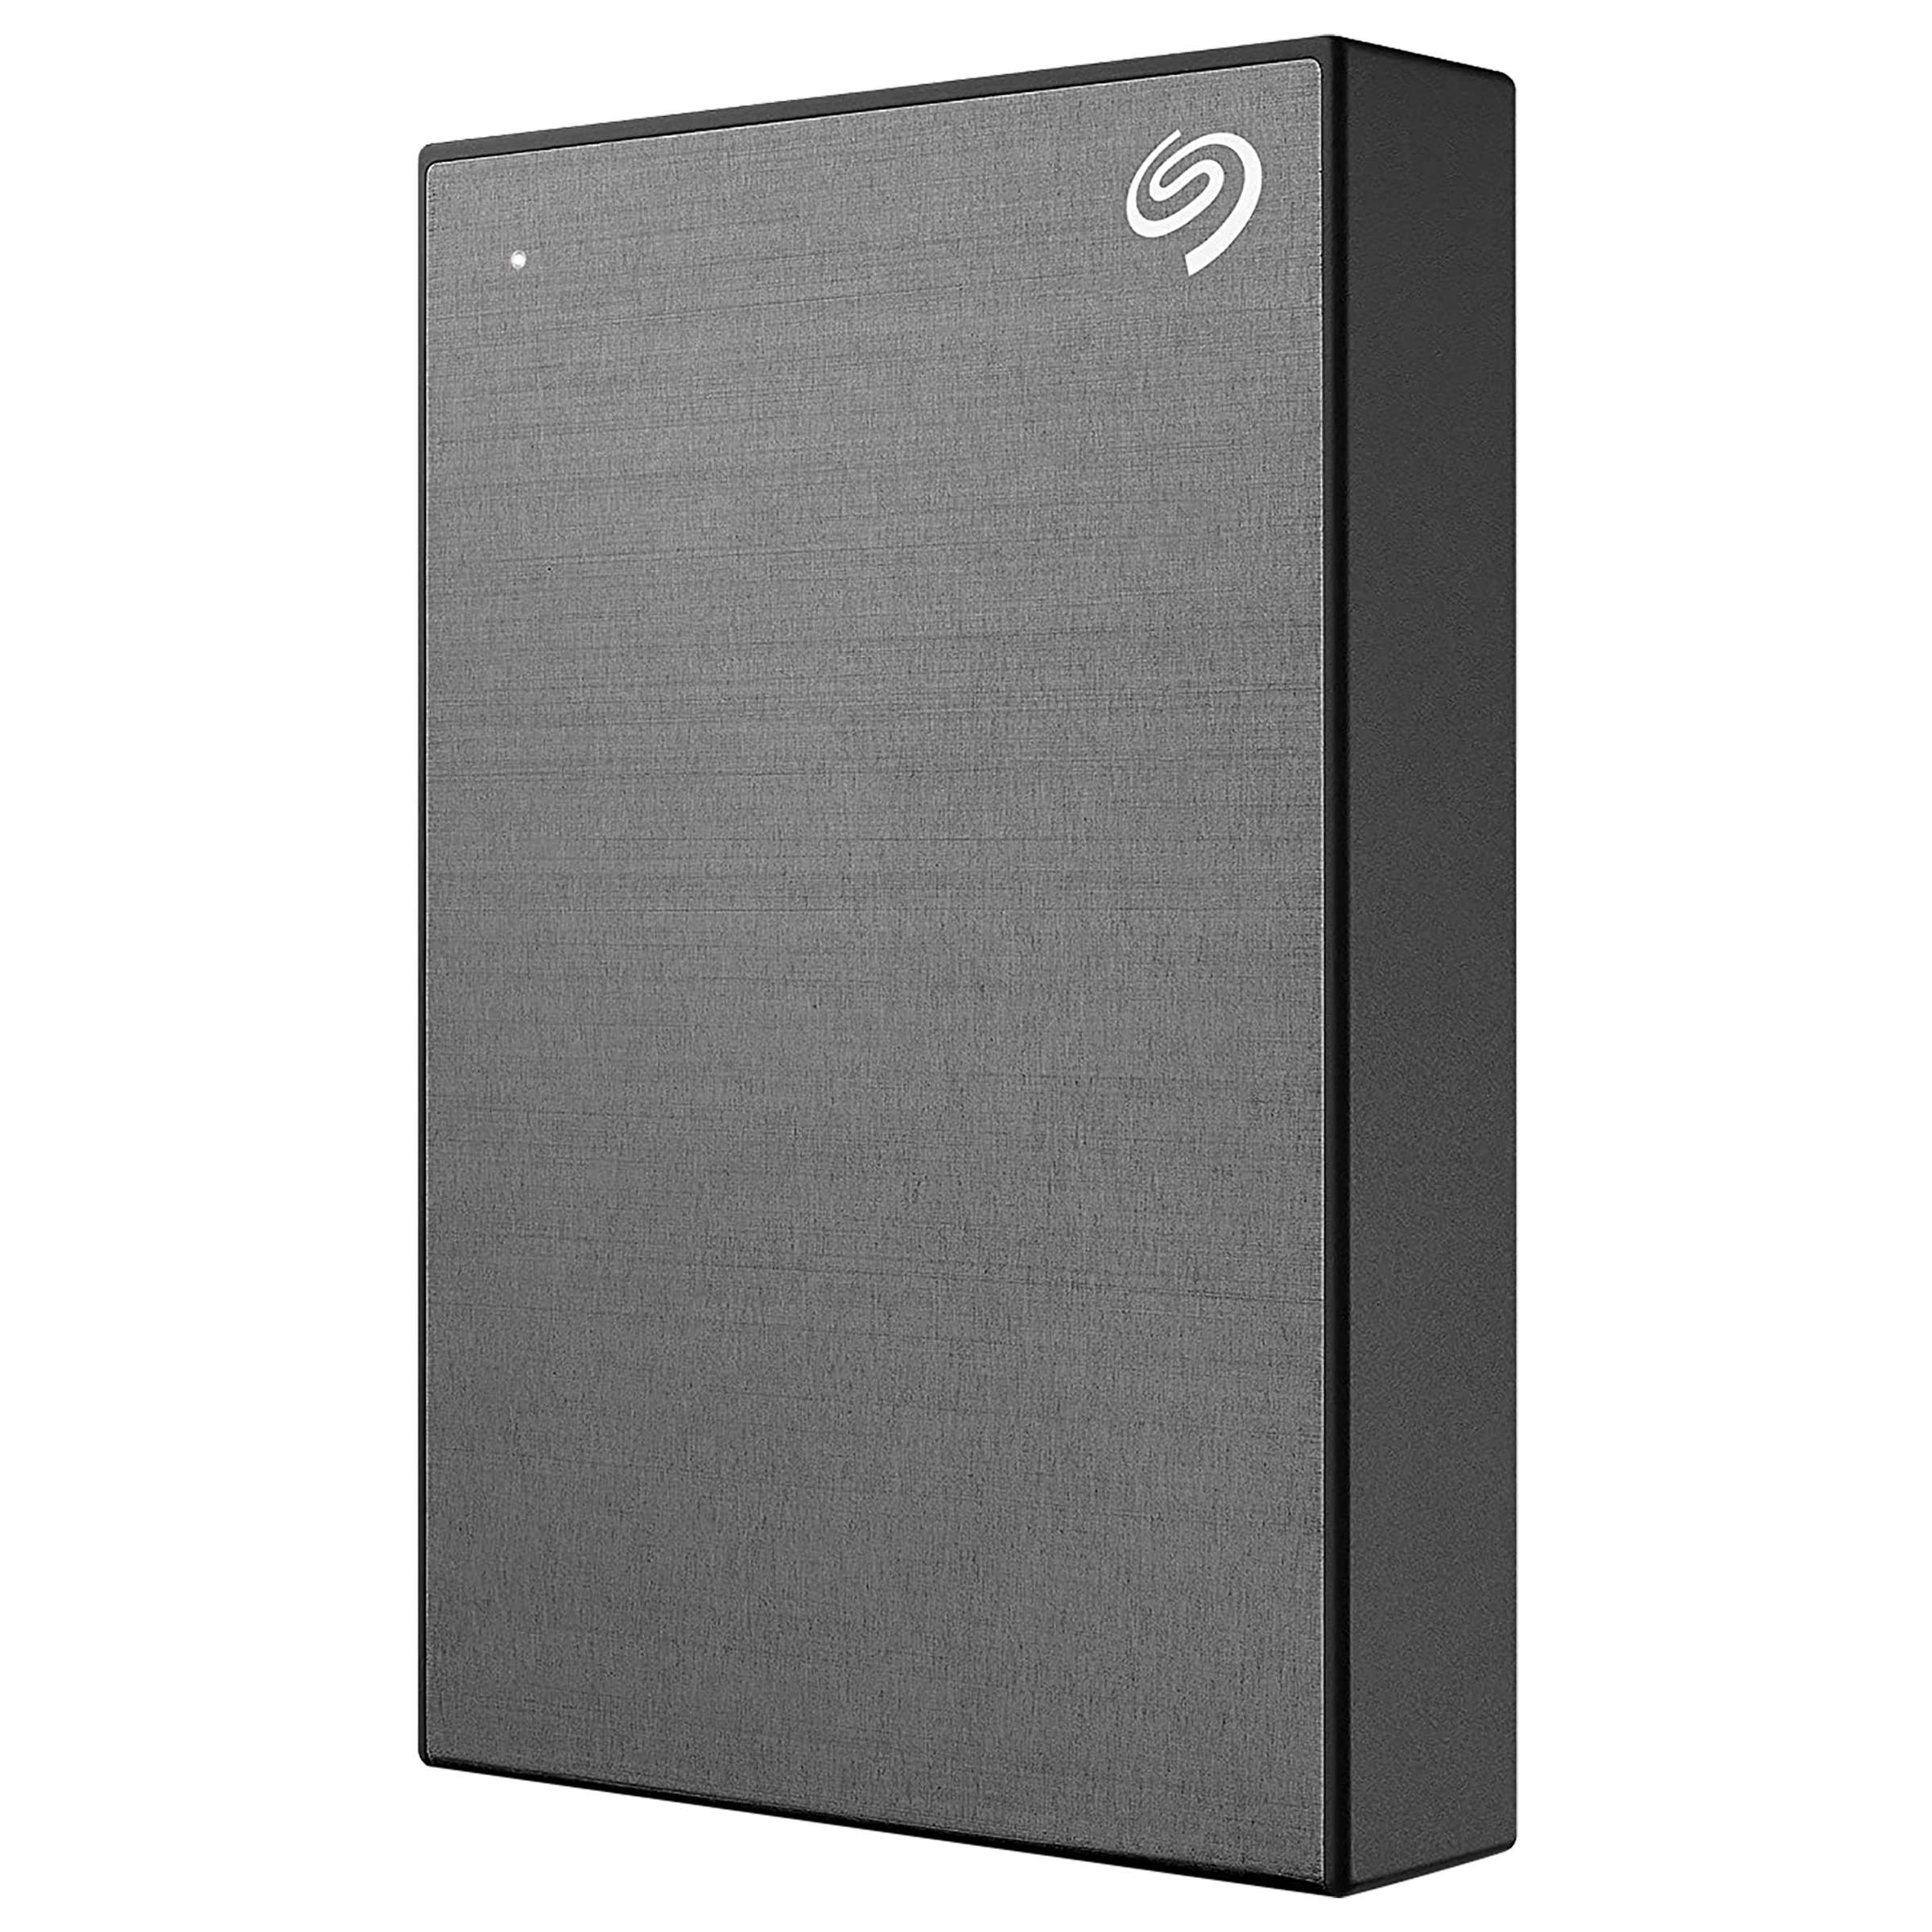 Seagate One Touch 5TB USB 3.0 Hard Disk Drive (Password Activated Hardware Encryption, STKZ5000404, Grey)_1